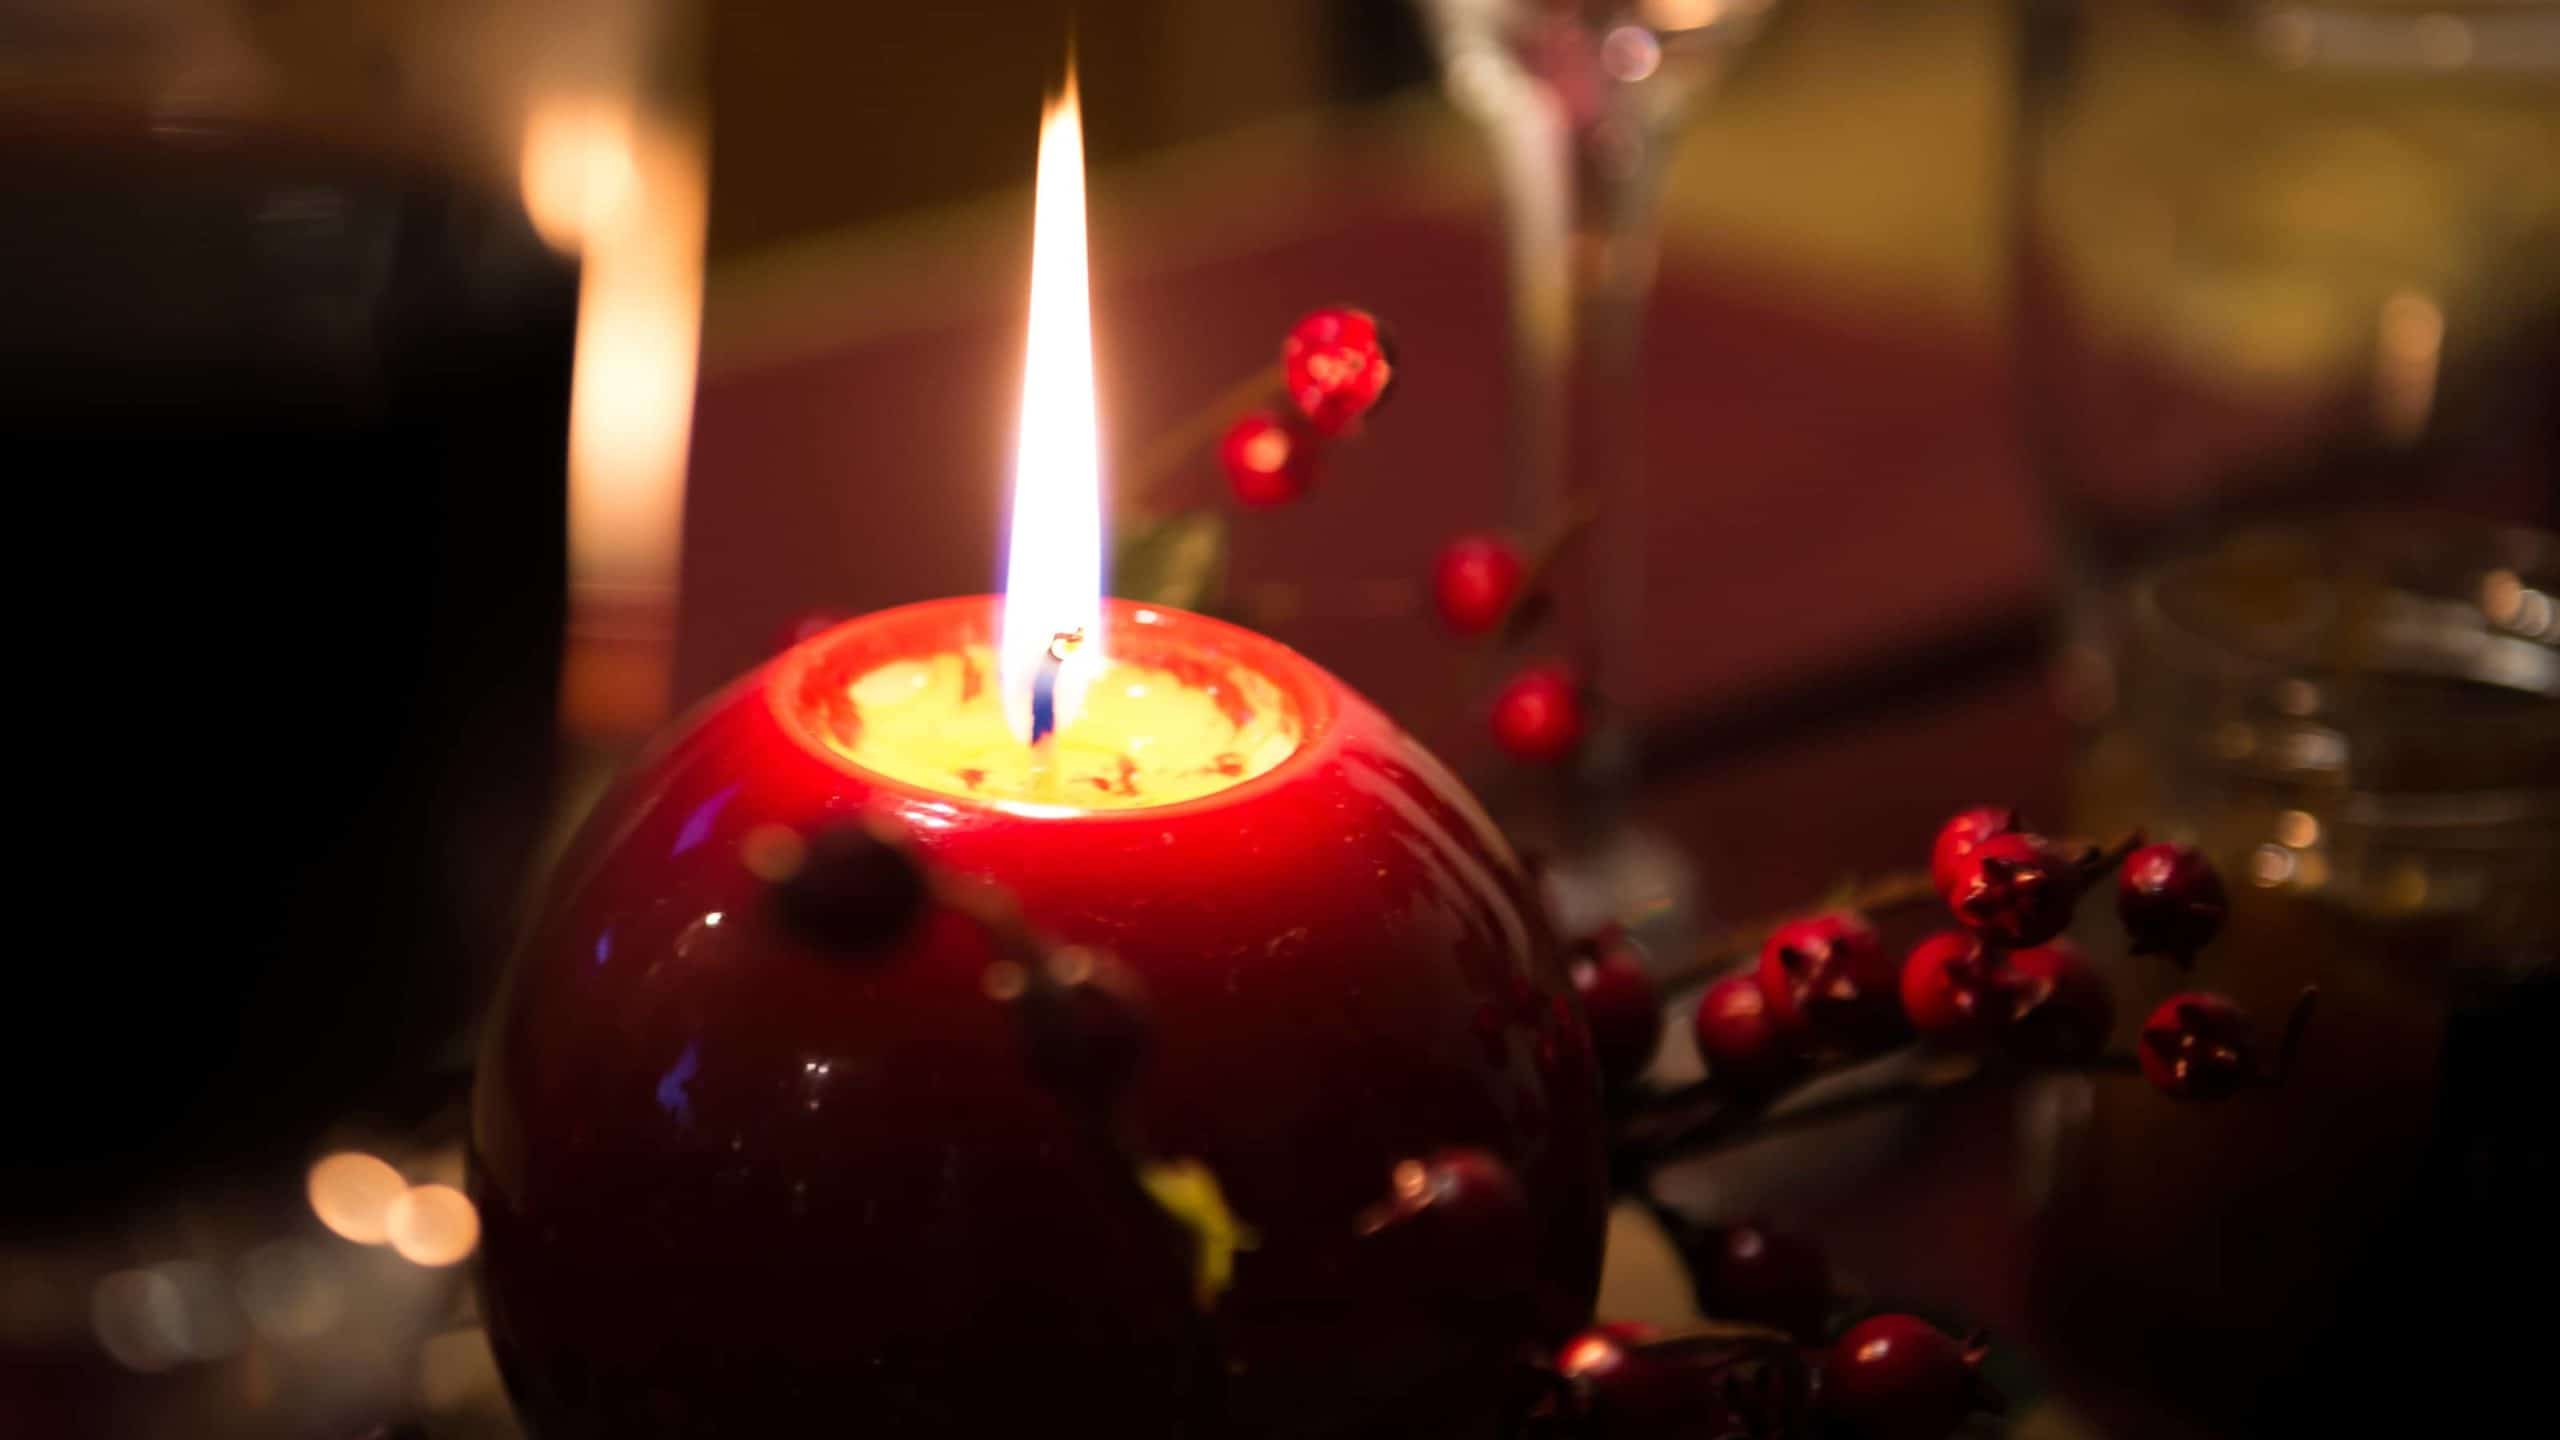 A holiday candle burns in a red globe beside winterberry.